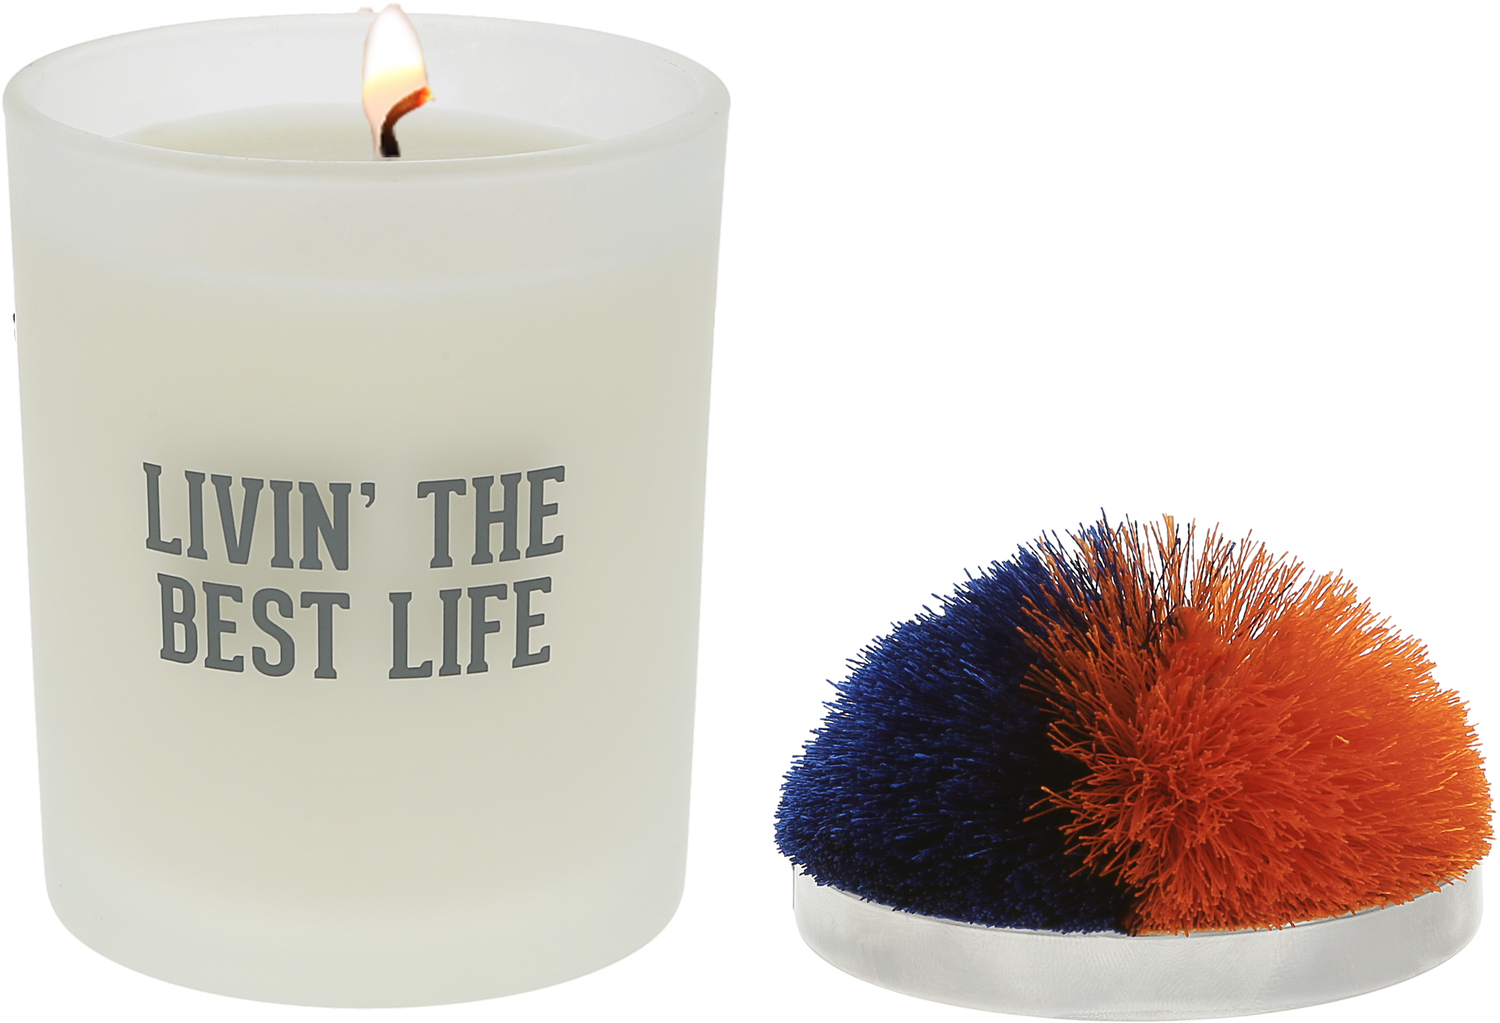 Best Life - Blue & Orange by Repre-Scent - Best Life - Blue & Orange - 5.5 oz - 100% Soy Wax Candle with Pom Pom Lid
Scent: Tranquility